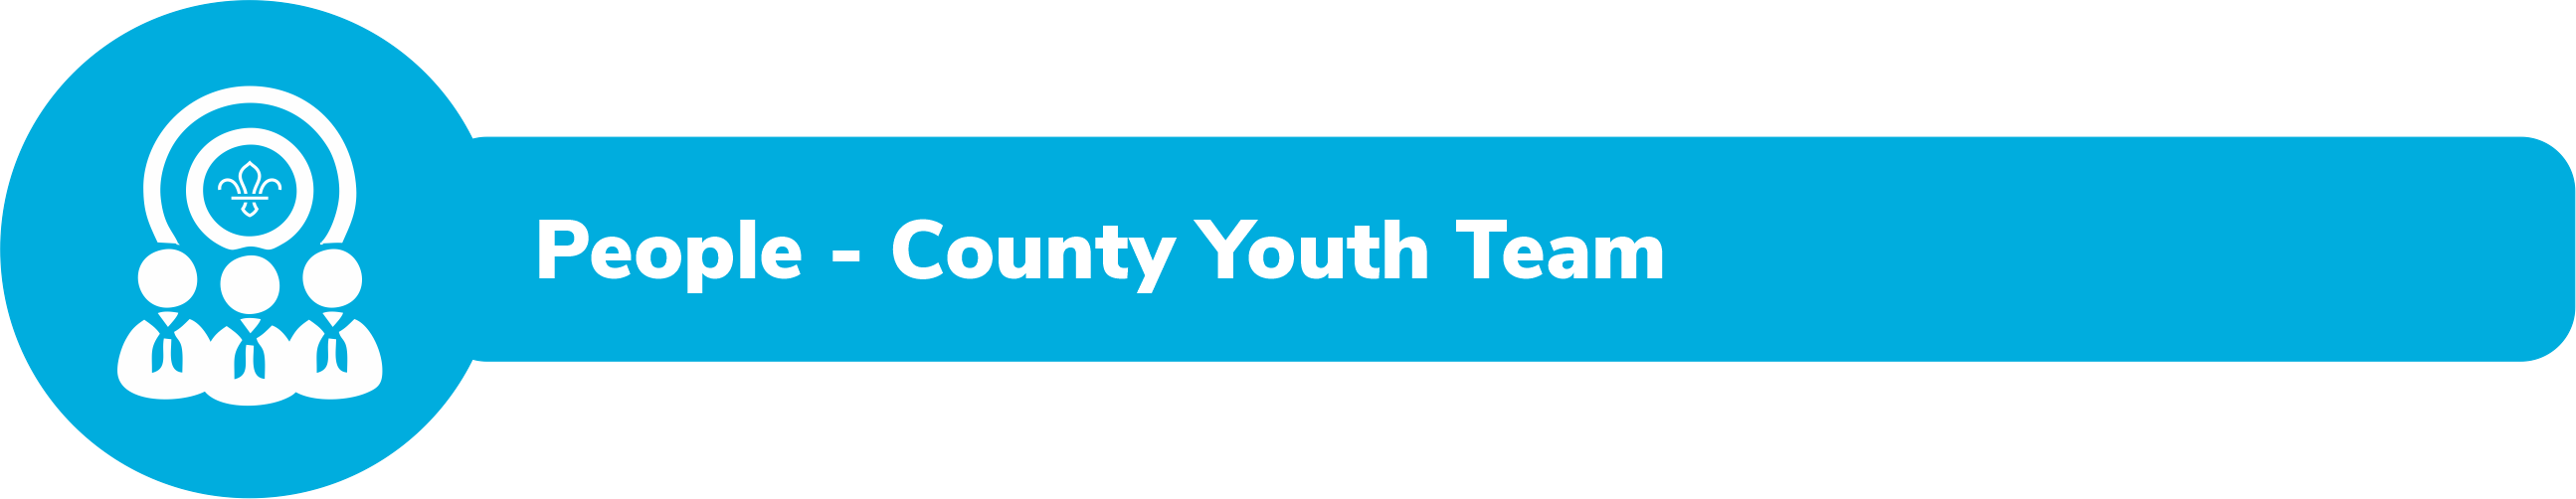 County Youth Team 